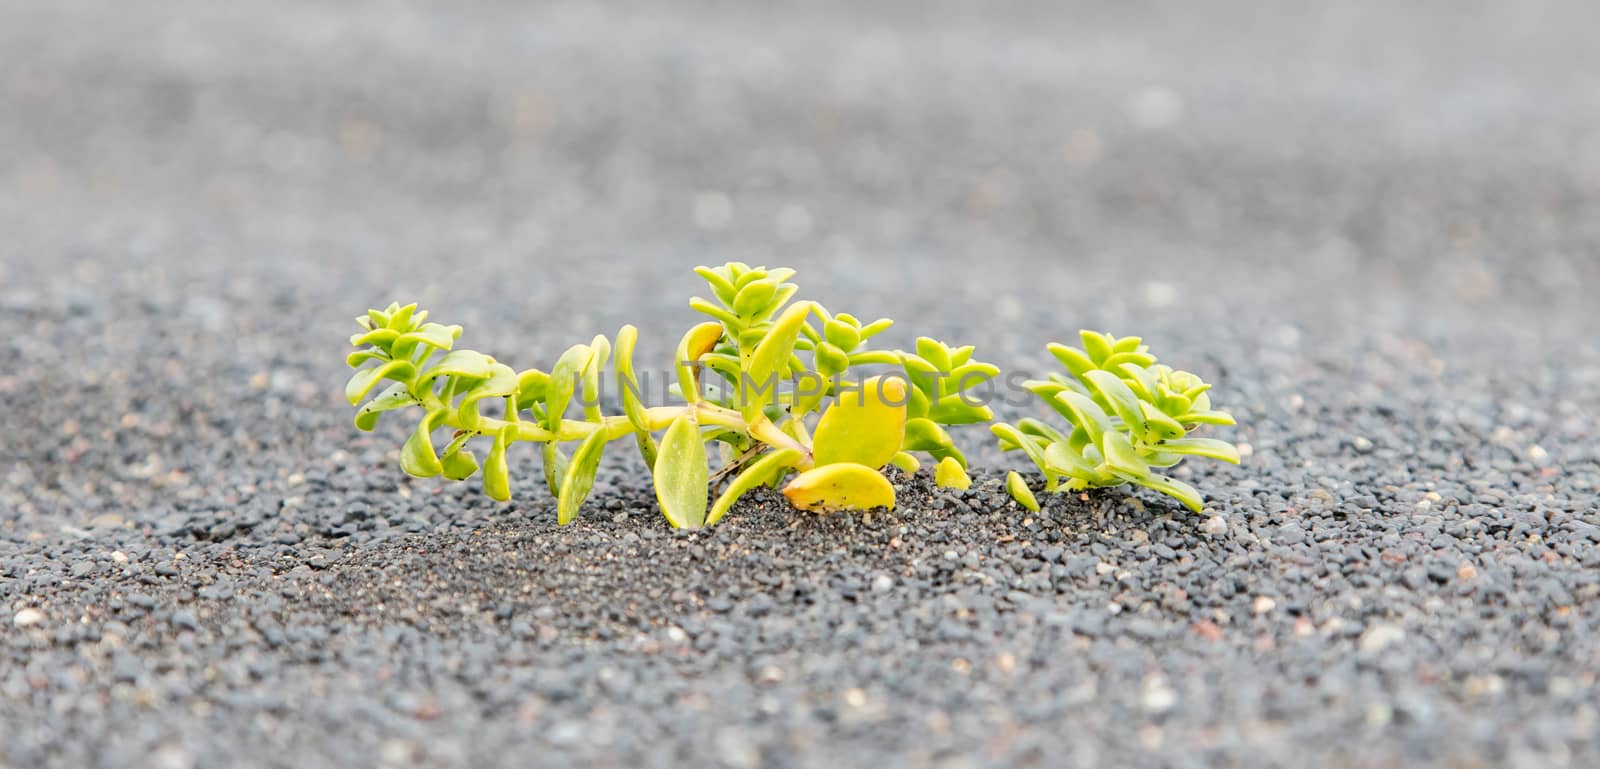 Plant growing on black sand - Iceland by michaklootwijk